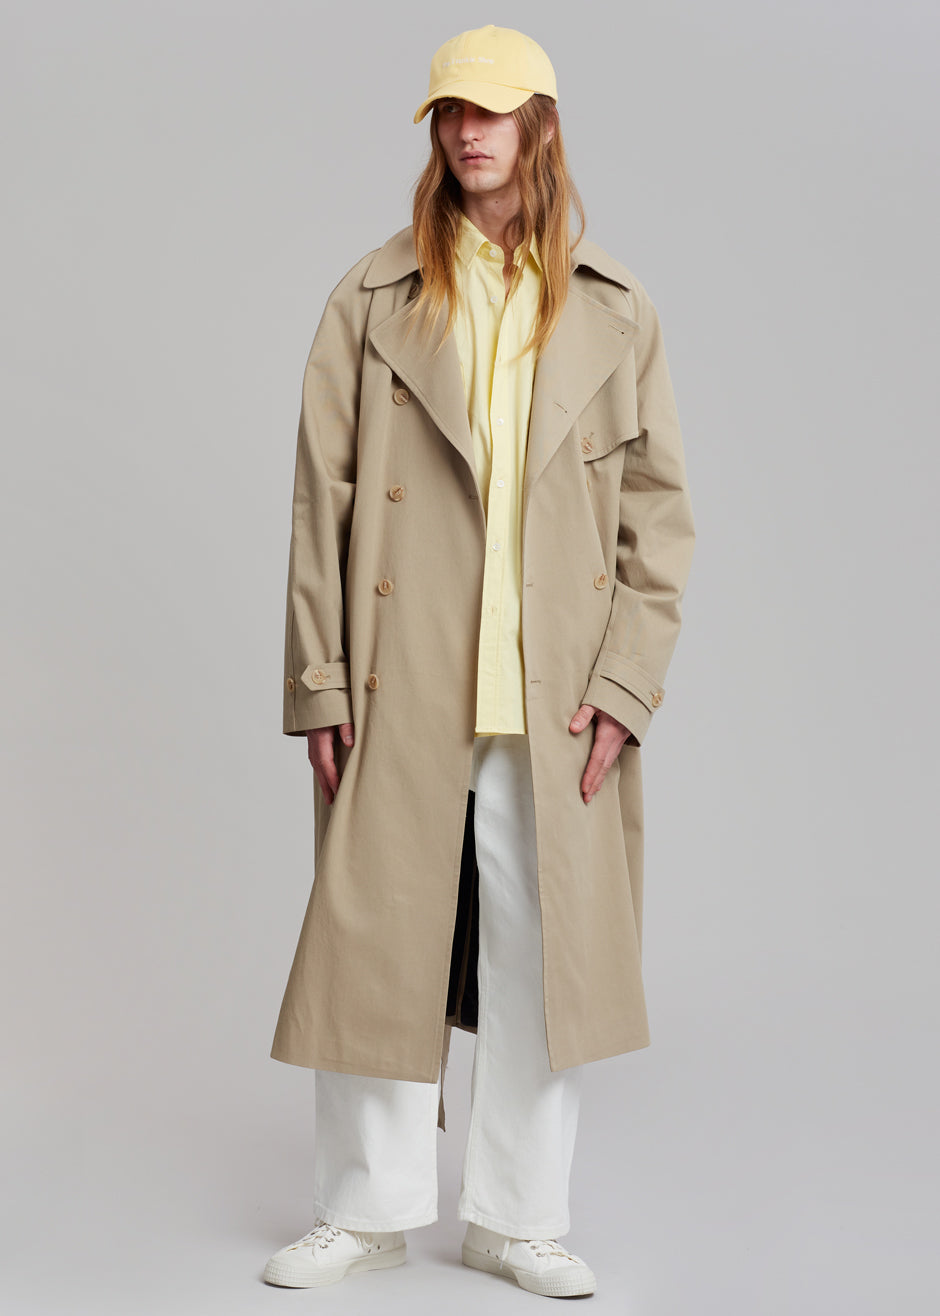 Umi Belted Trench Coat - Beige